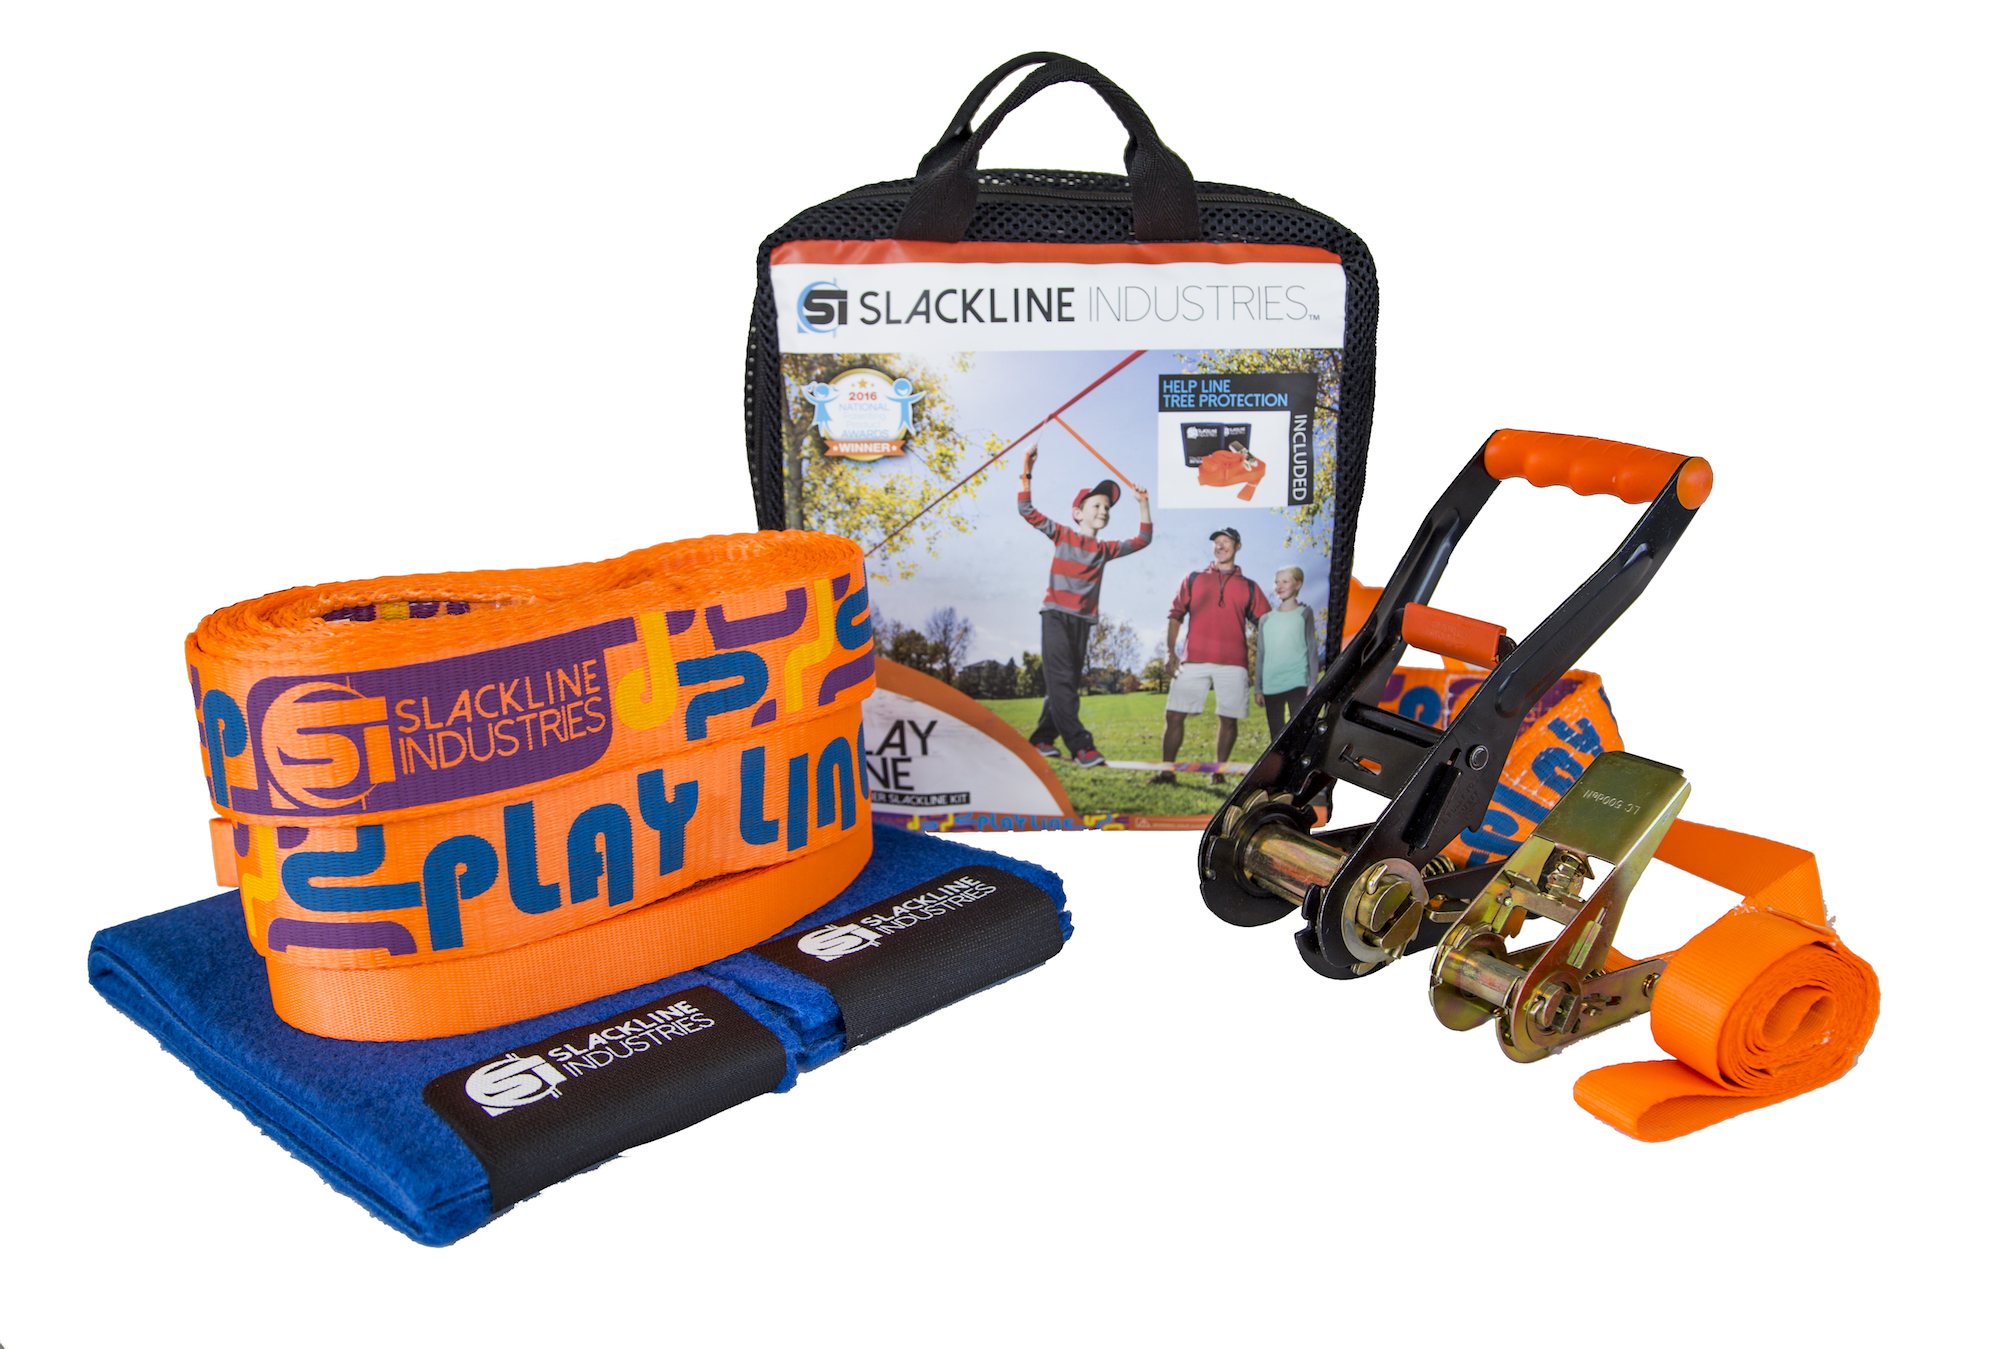 Slackline Industries partners with Trees for the Future, launches new